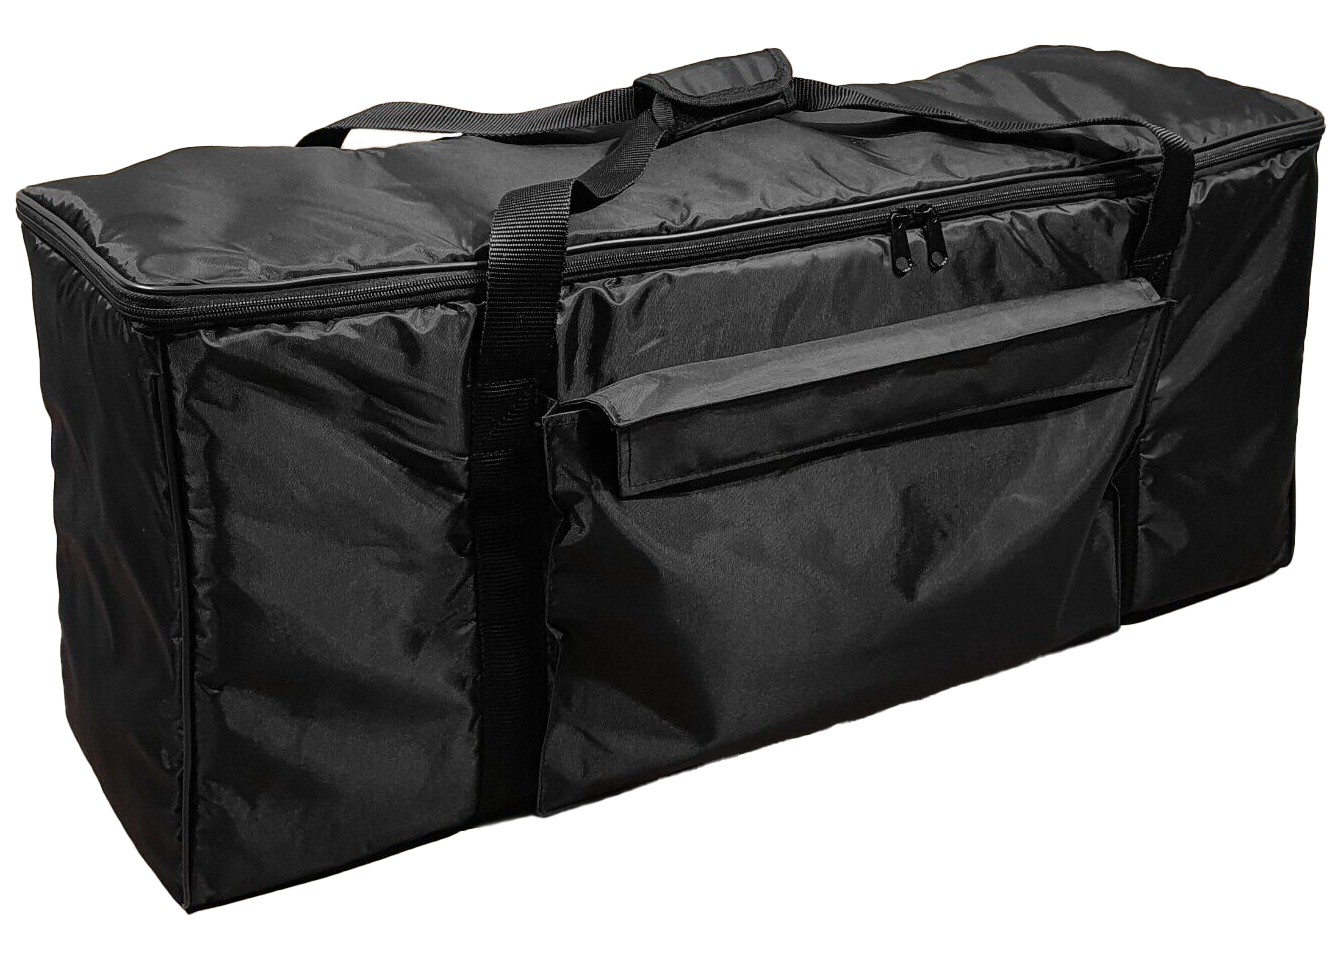 Custom dual-padded gig bag / soft carrying case for Guitar Head Amp (29.5" x 8.9" x 12.5" Inches)